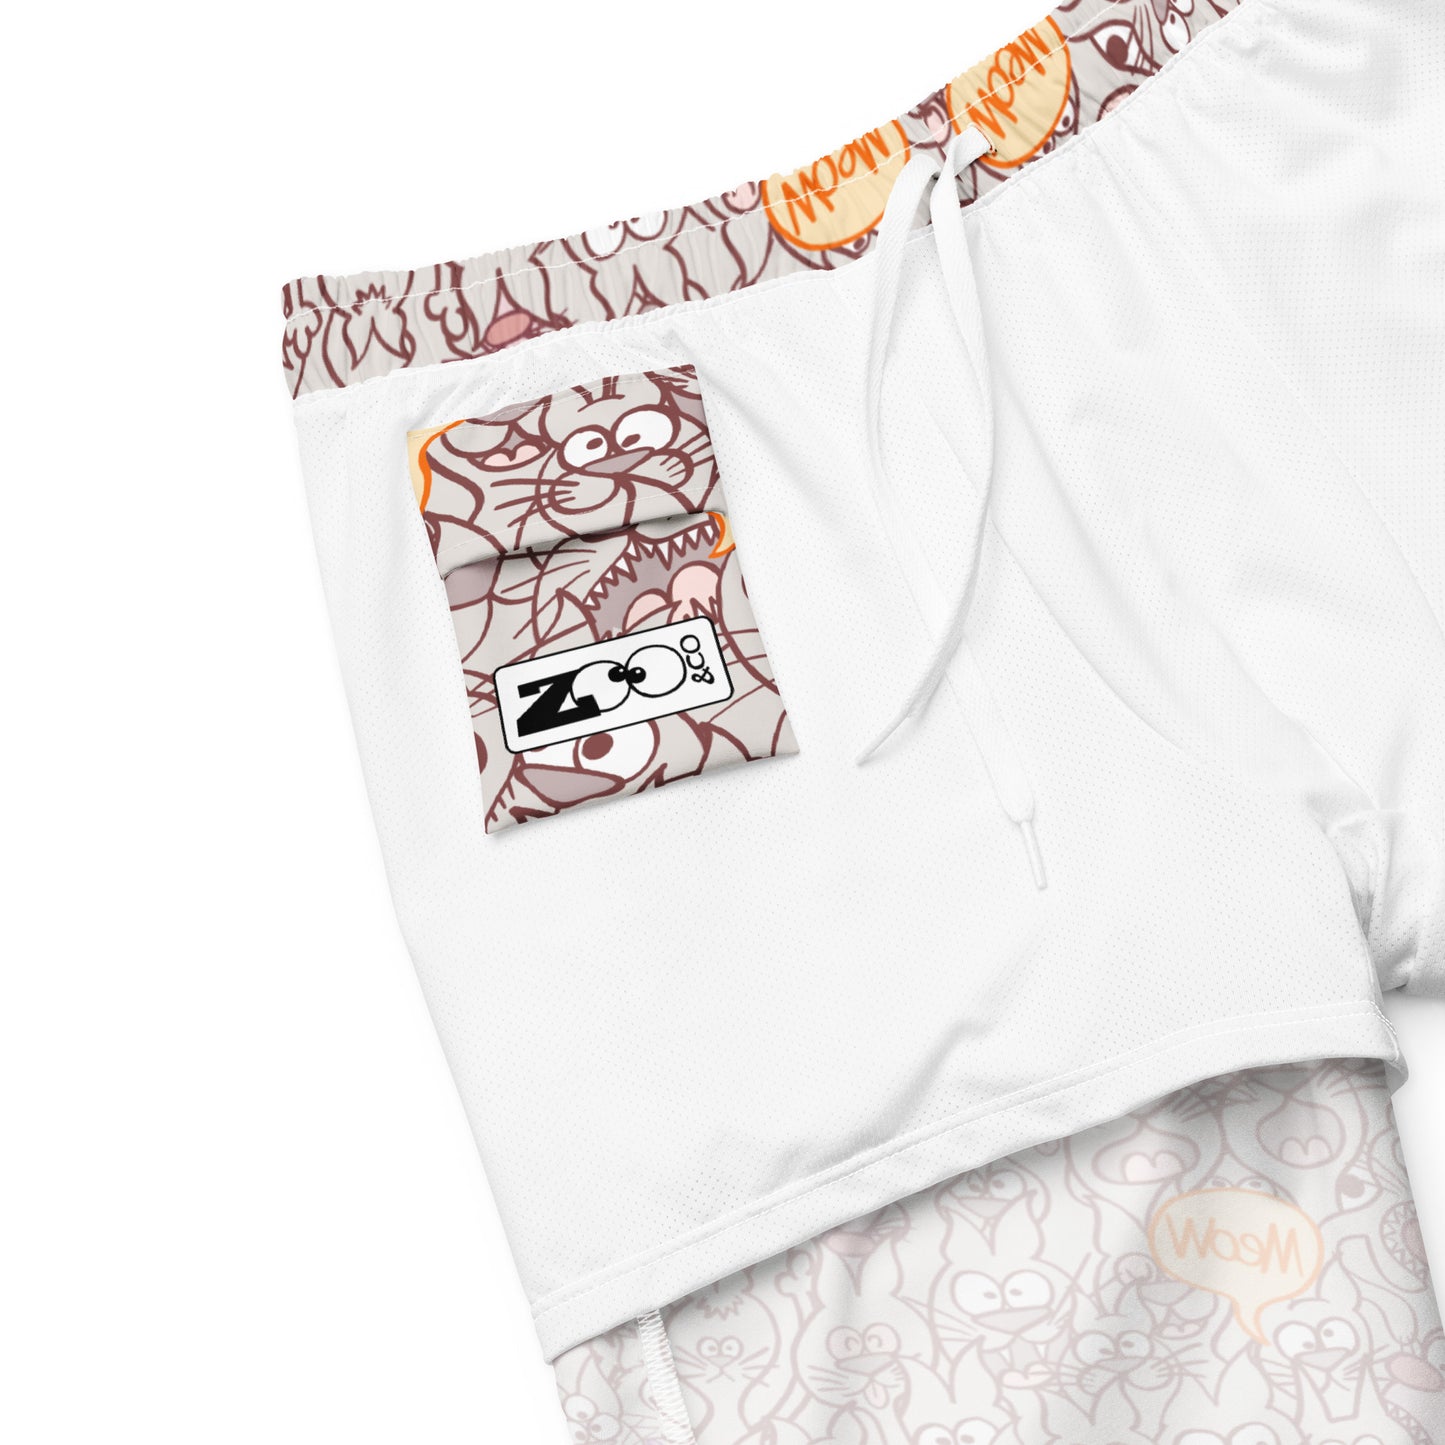 Exclusive design only for real cat lovers Men's swim trunks. Product details